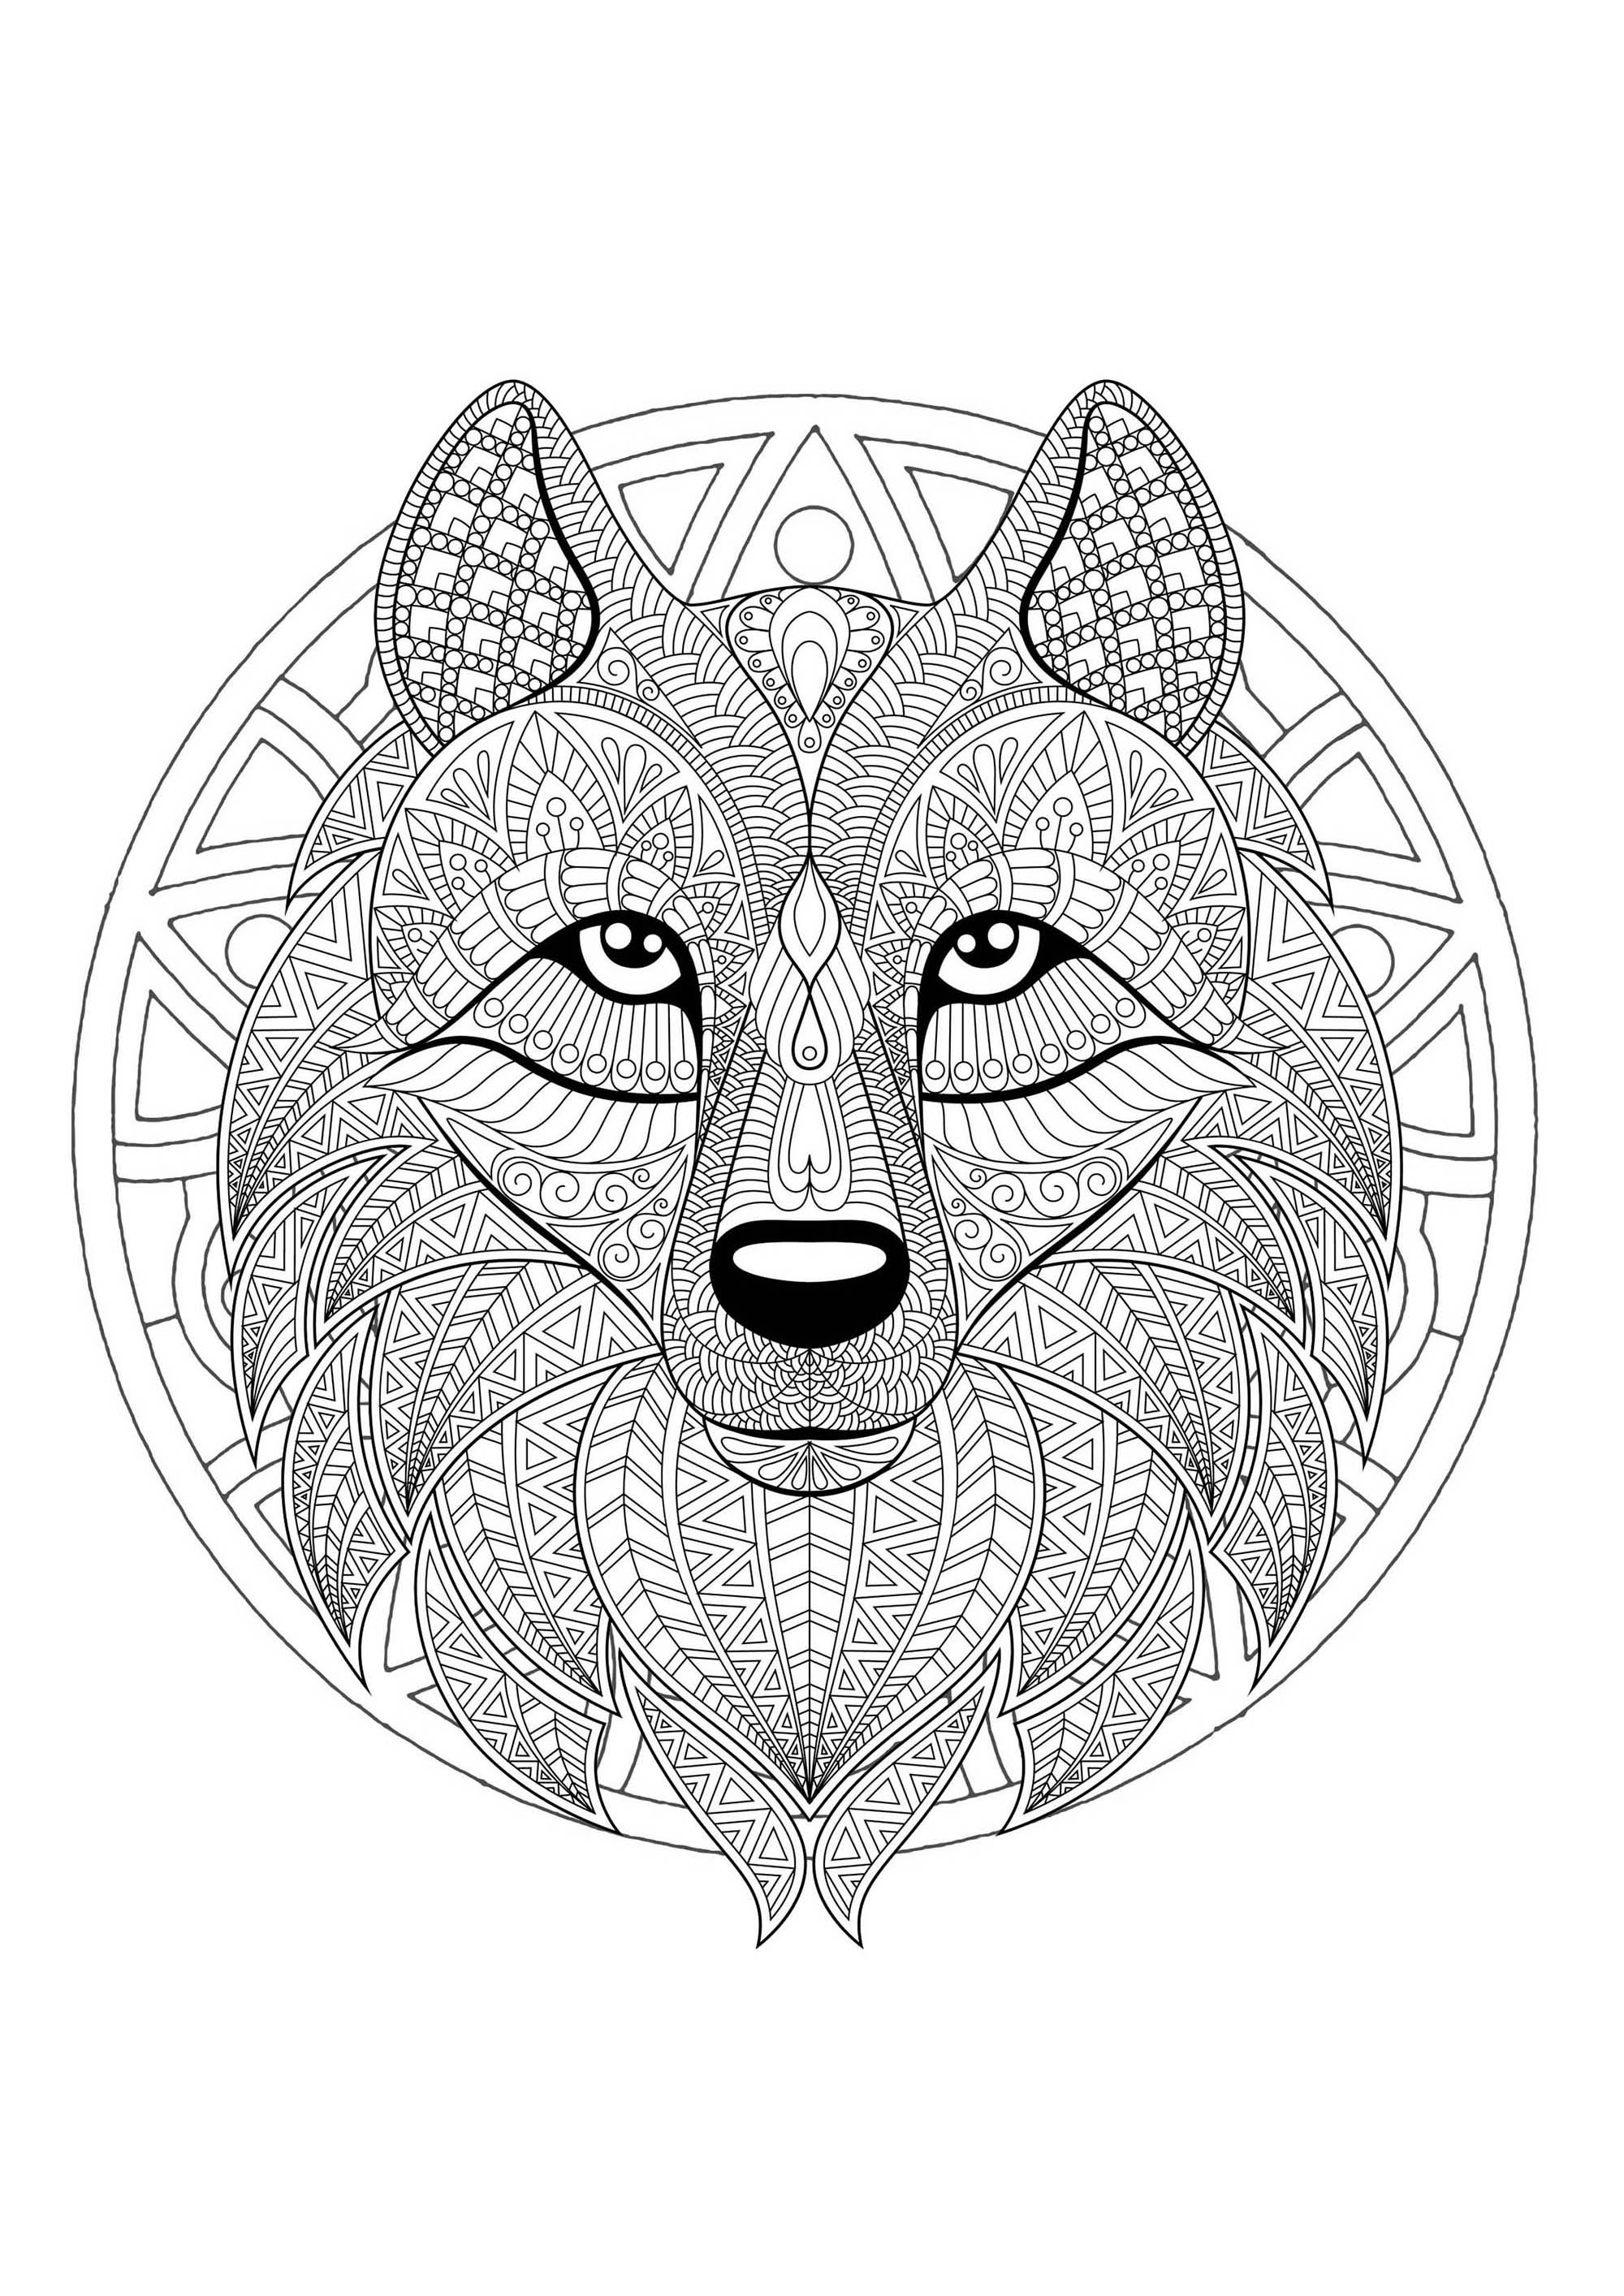 Mandala with geometric patterns and Wolf head full of complex details